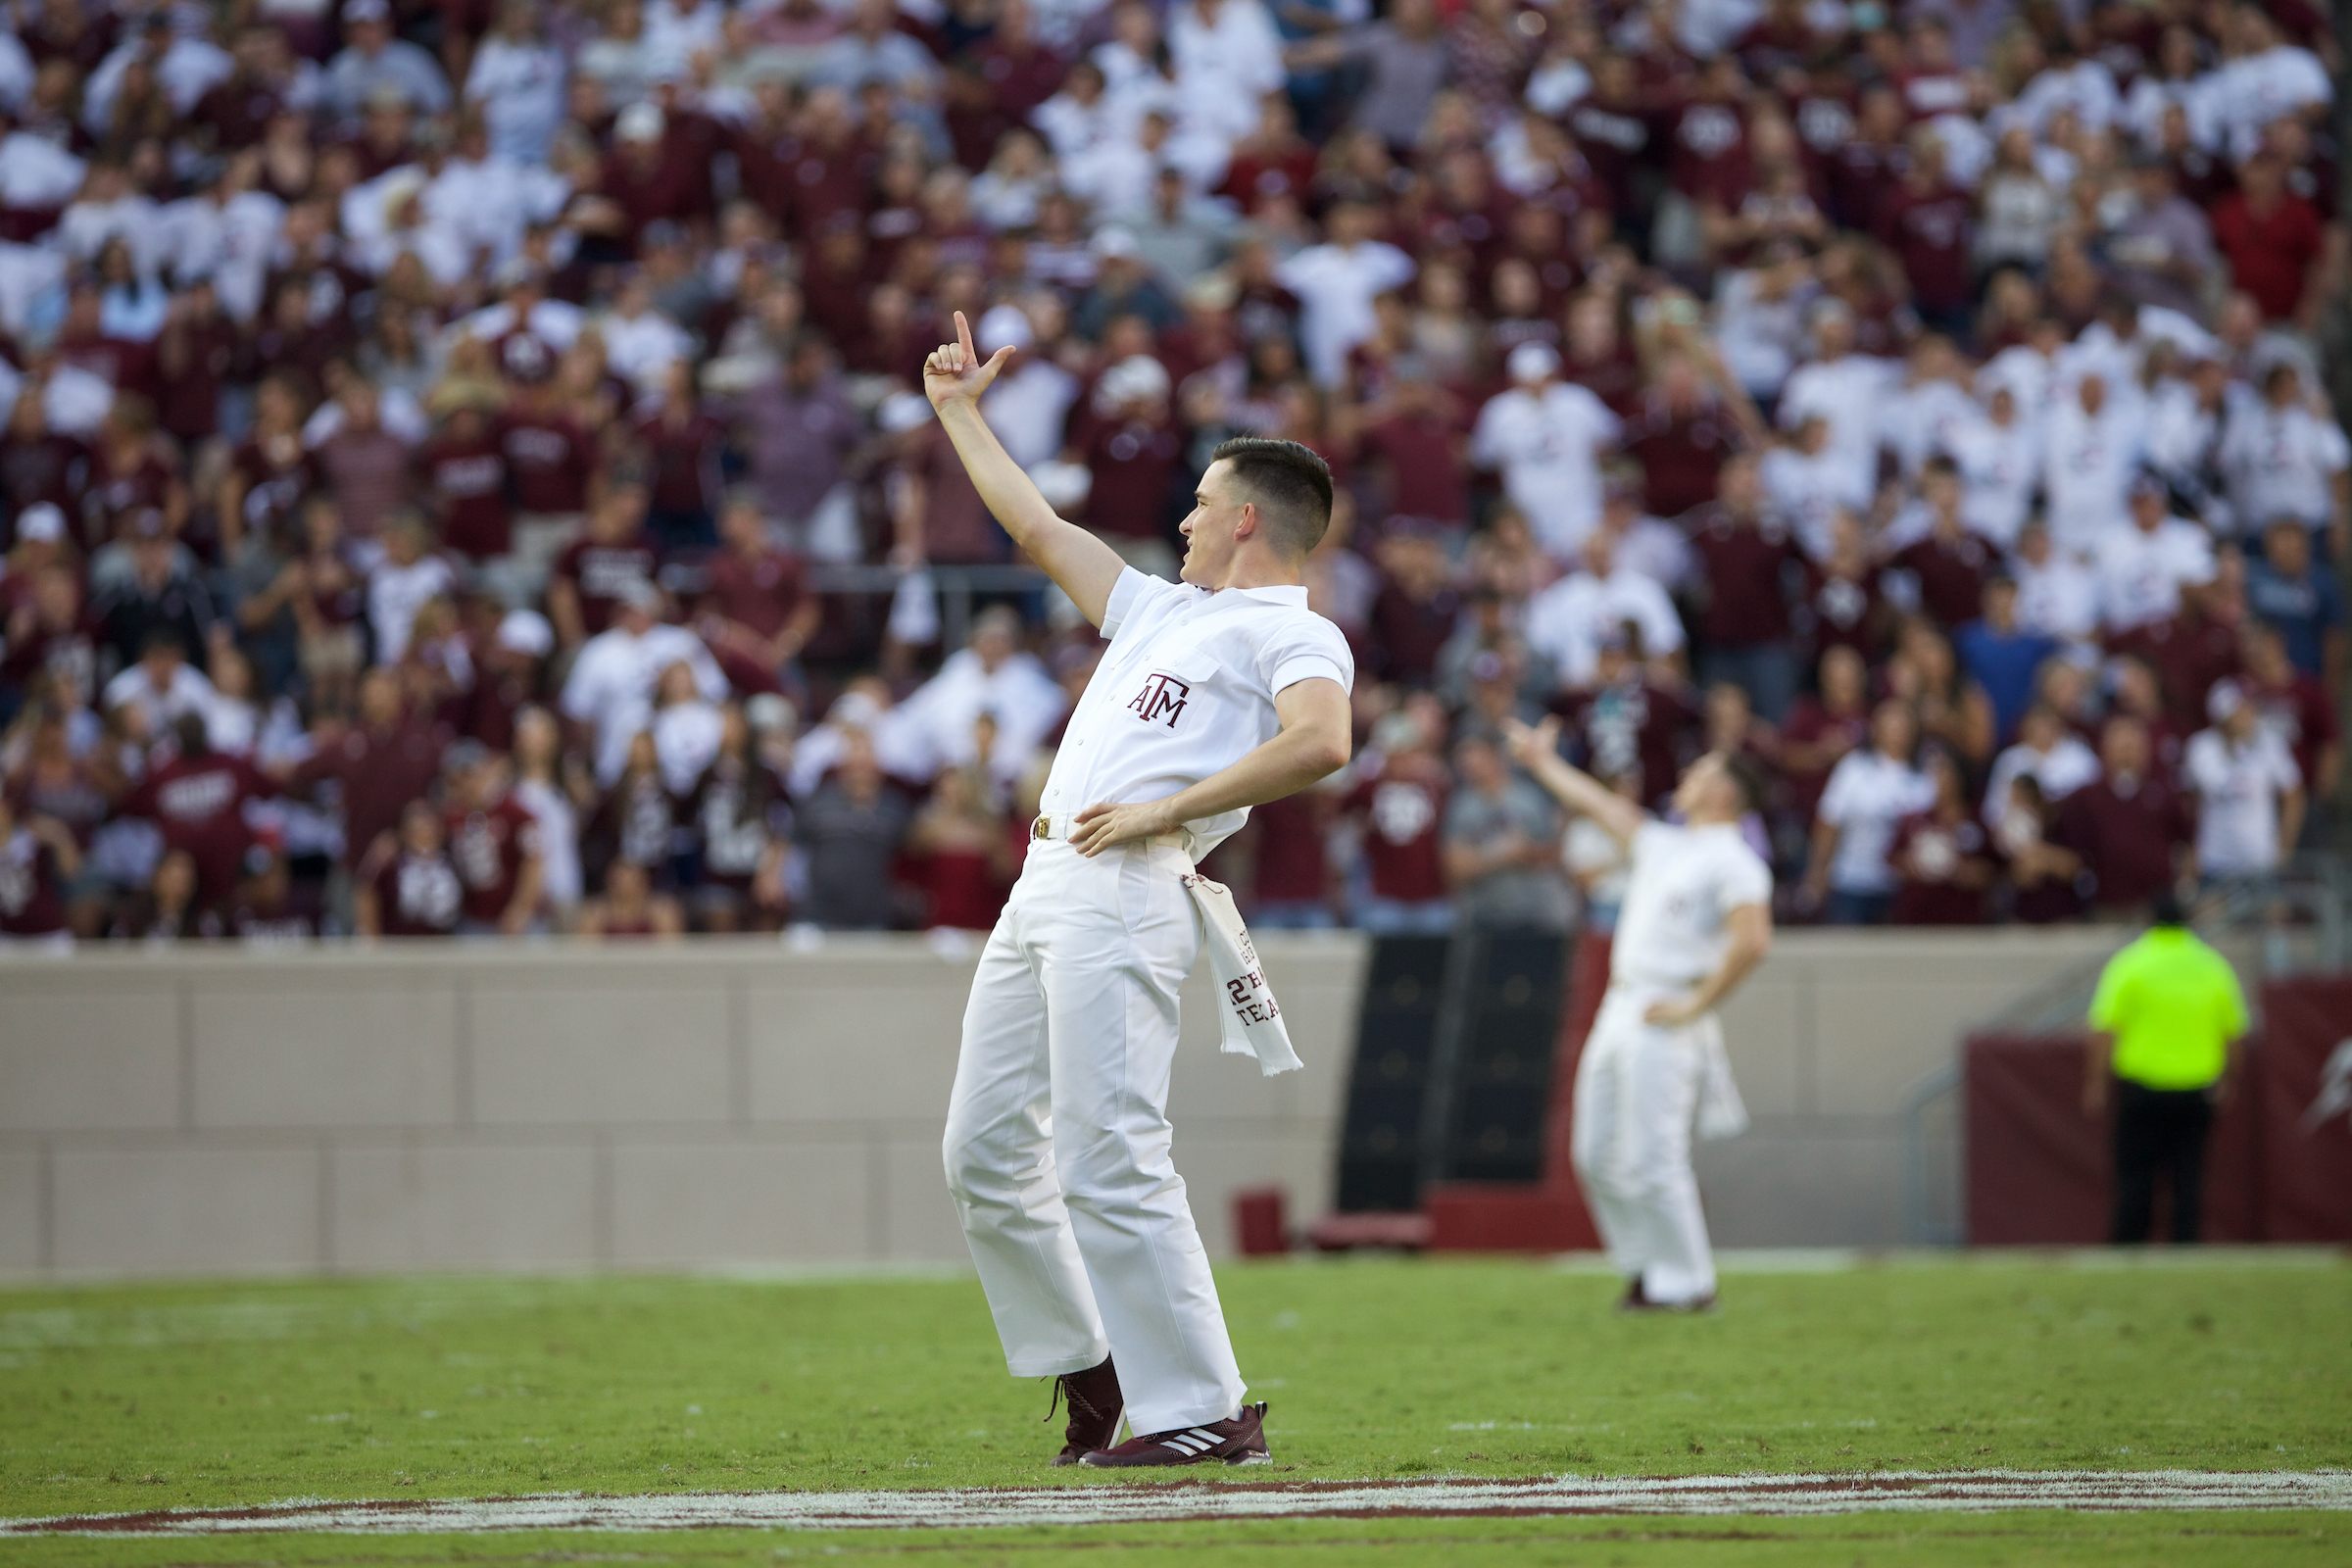 Texas A&M Football Game Day Guide 2019 - Texas A&M Today